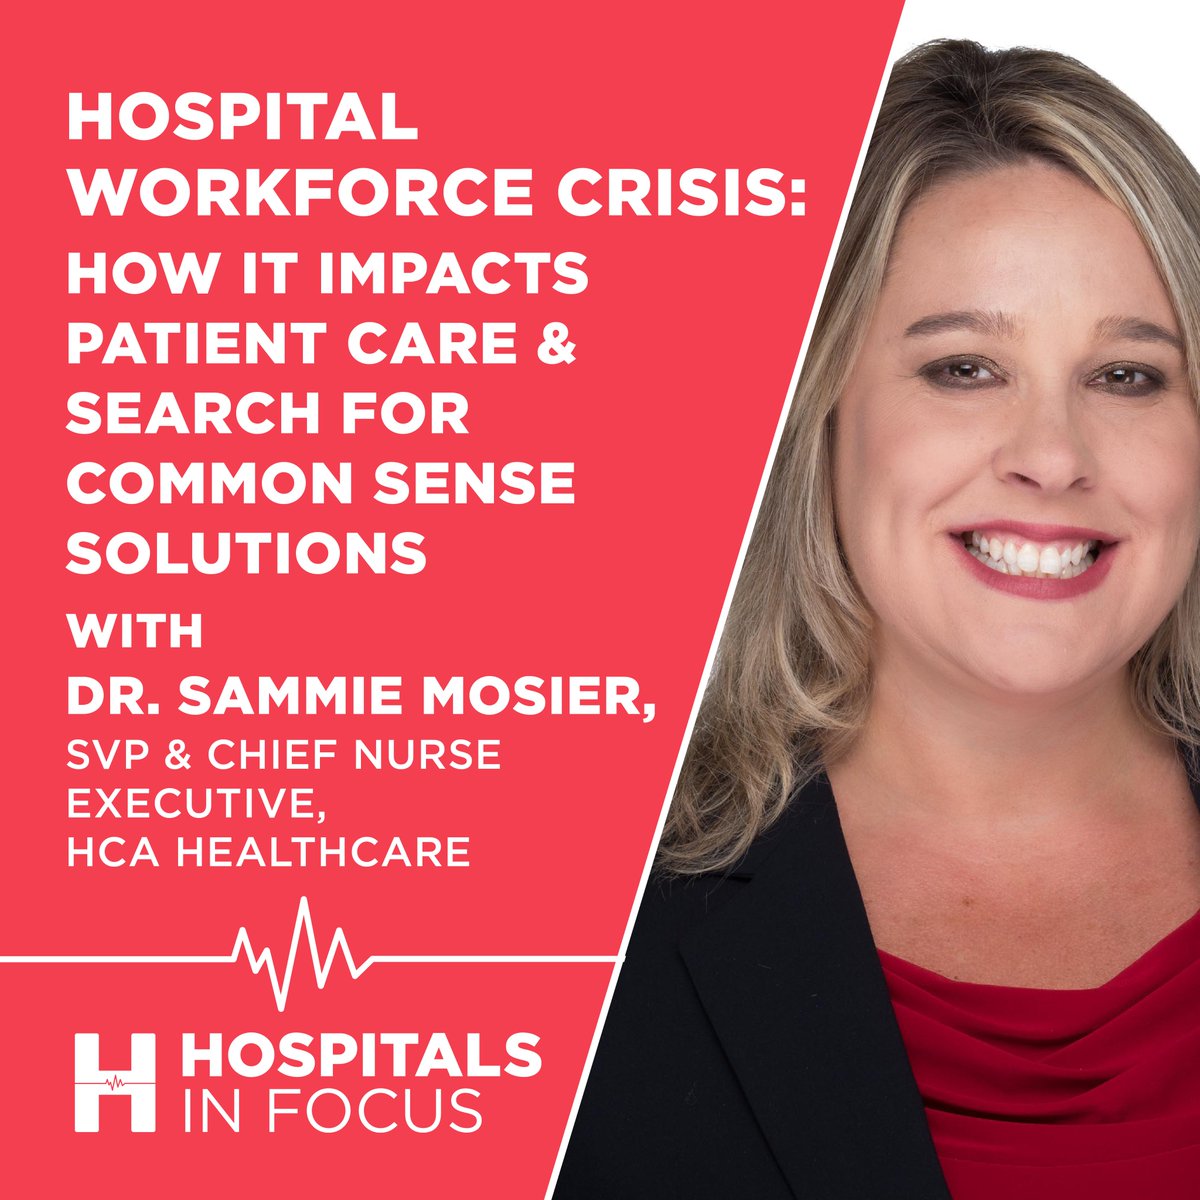 How is growing hospital workforce shortage affecting care at the bedside & what is being done to train and retain nurses? Tackled these important topics w/ @HCAhealthcare's Dr. Sammie Mosier in new episode of #HospitalsInFocus. Listen 🔊 fah.org/podcasts/hospi…